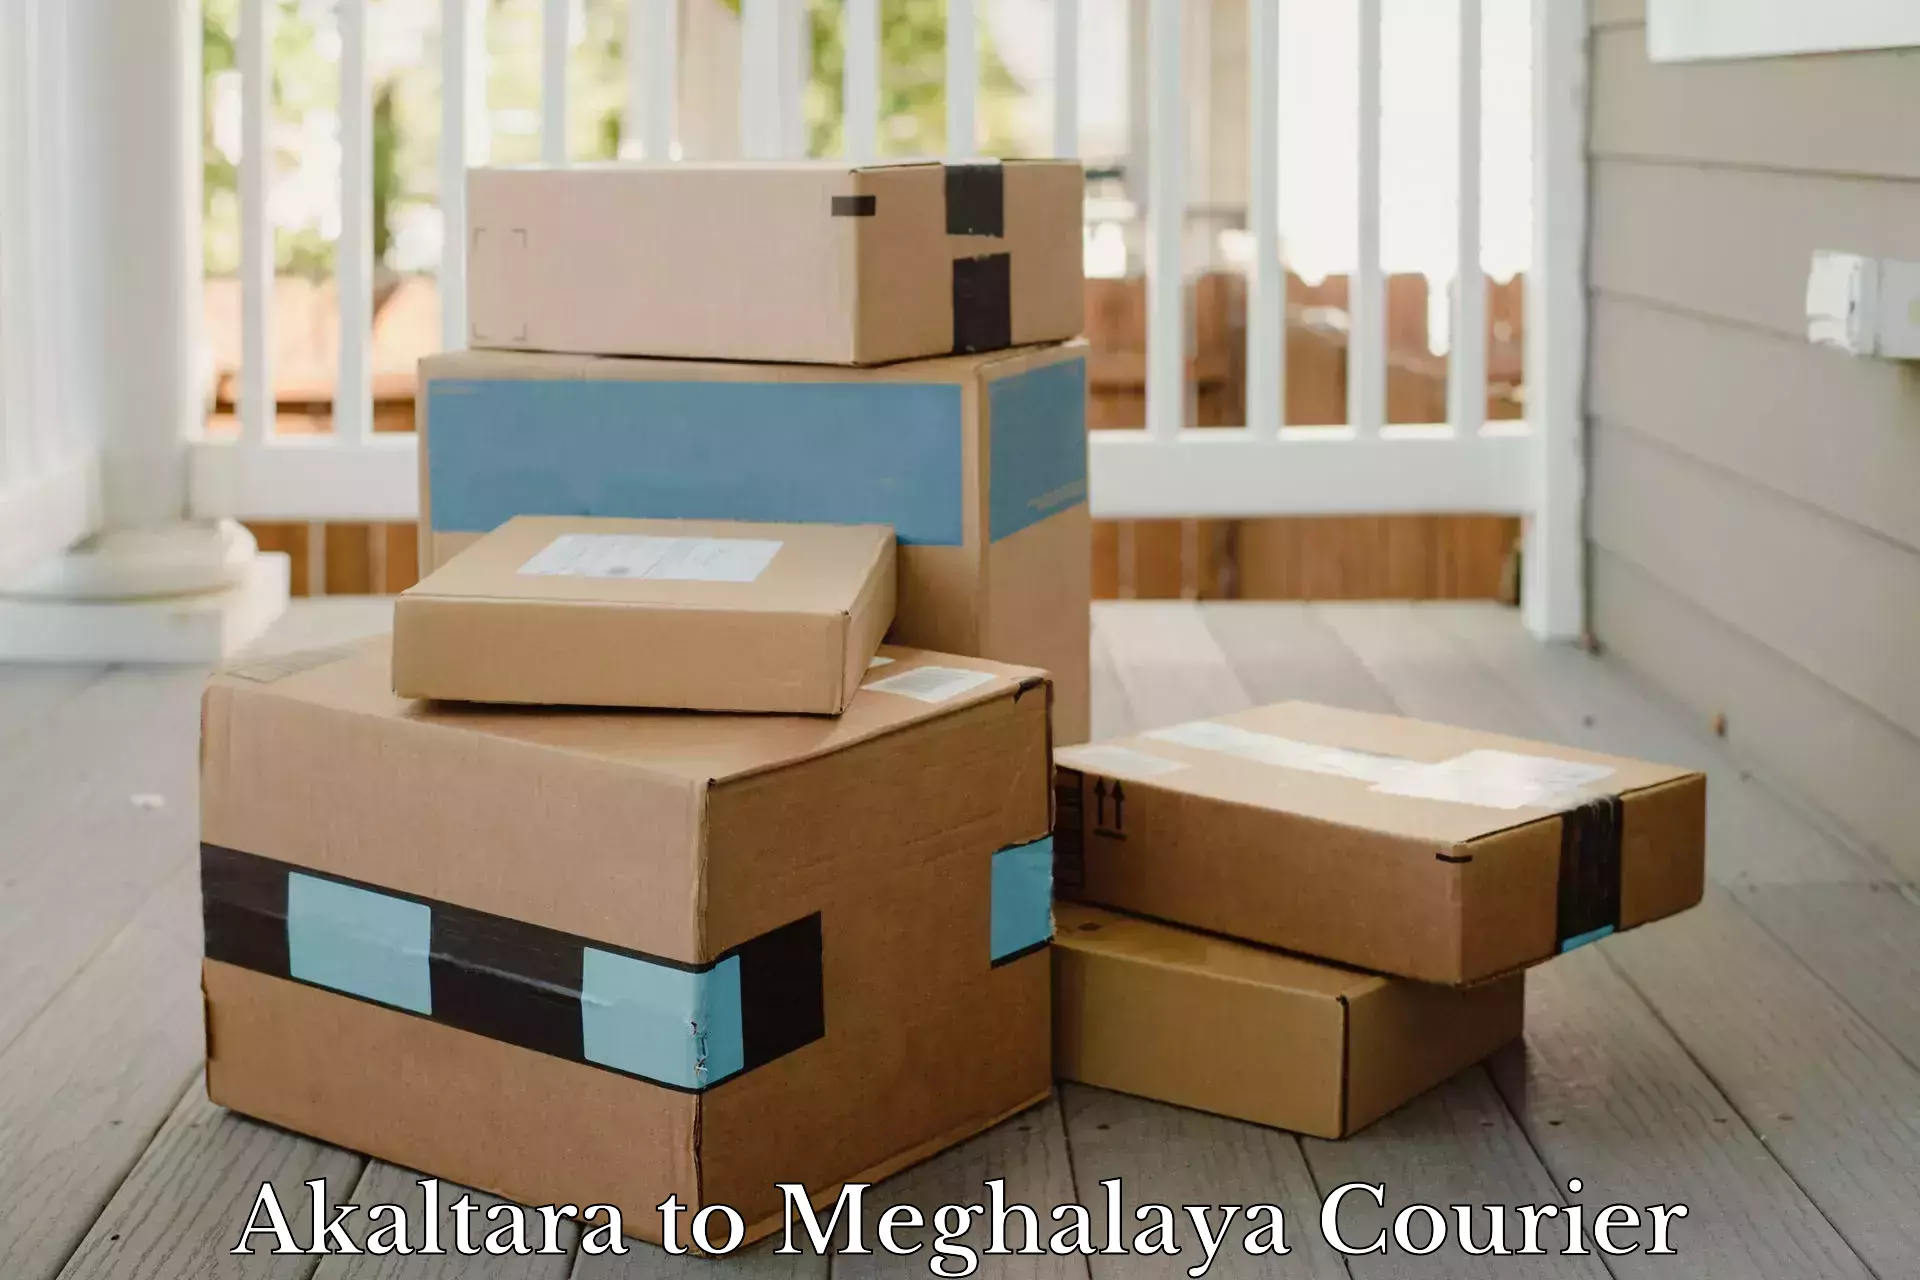 Tailored delivery services Akaltara to Shillong